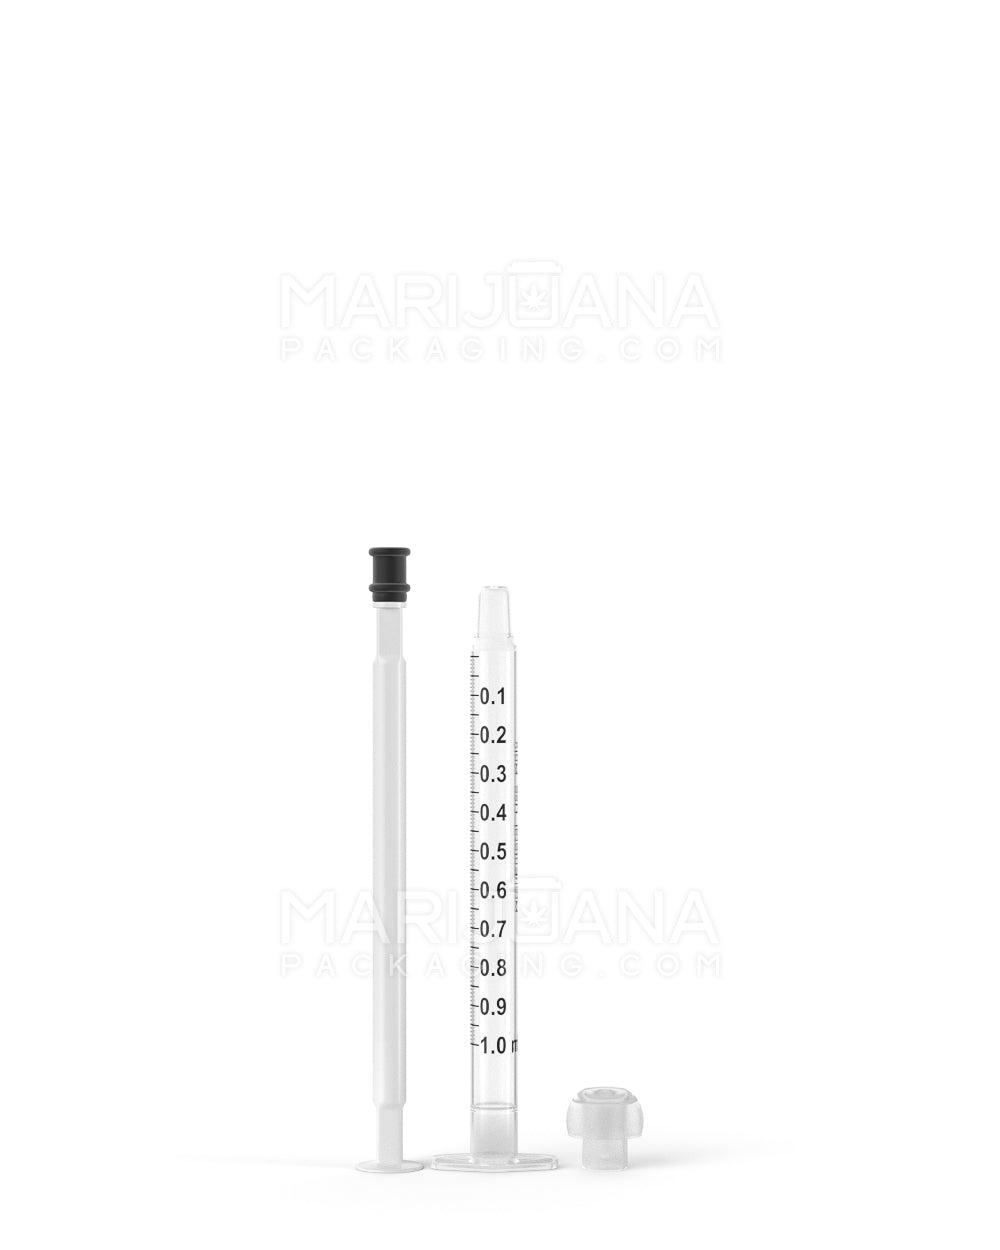 Plastic Oral Concentrate Syringes | 1mL - 0.1mL Increments | Sample - 3